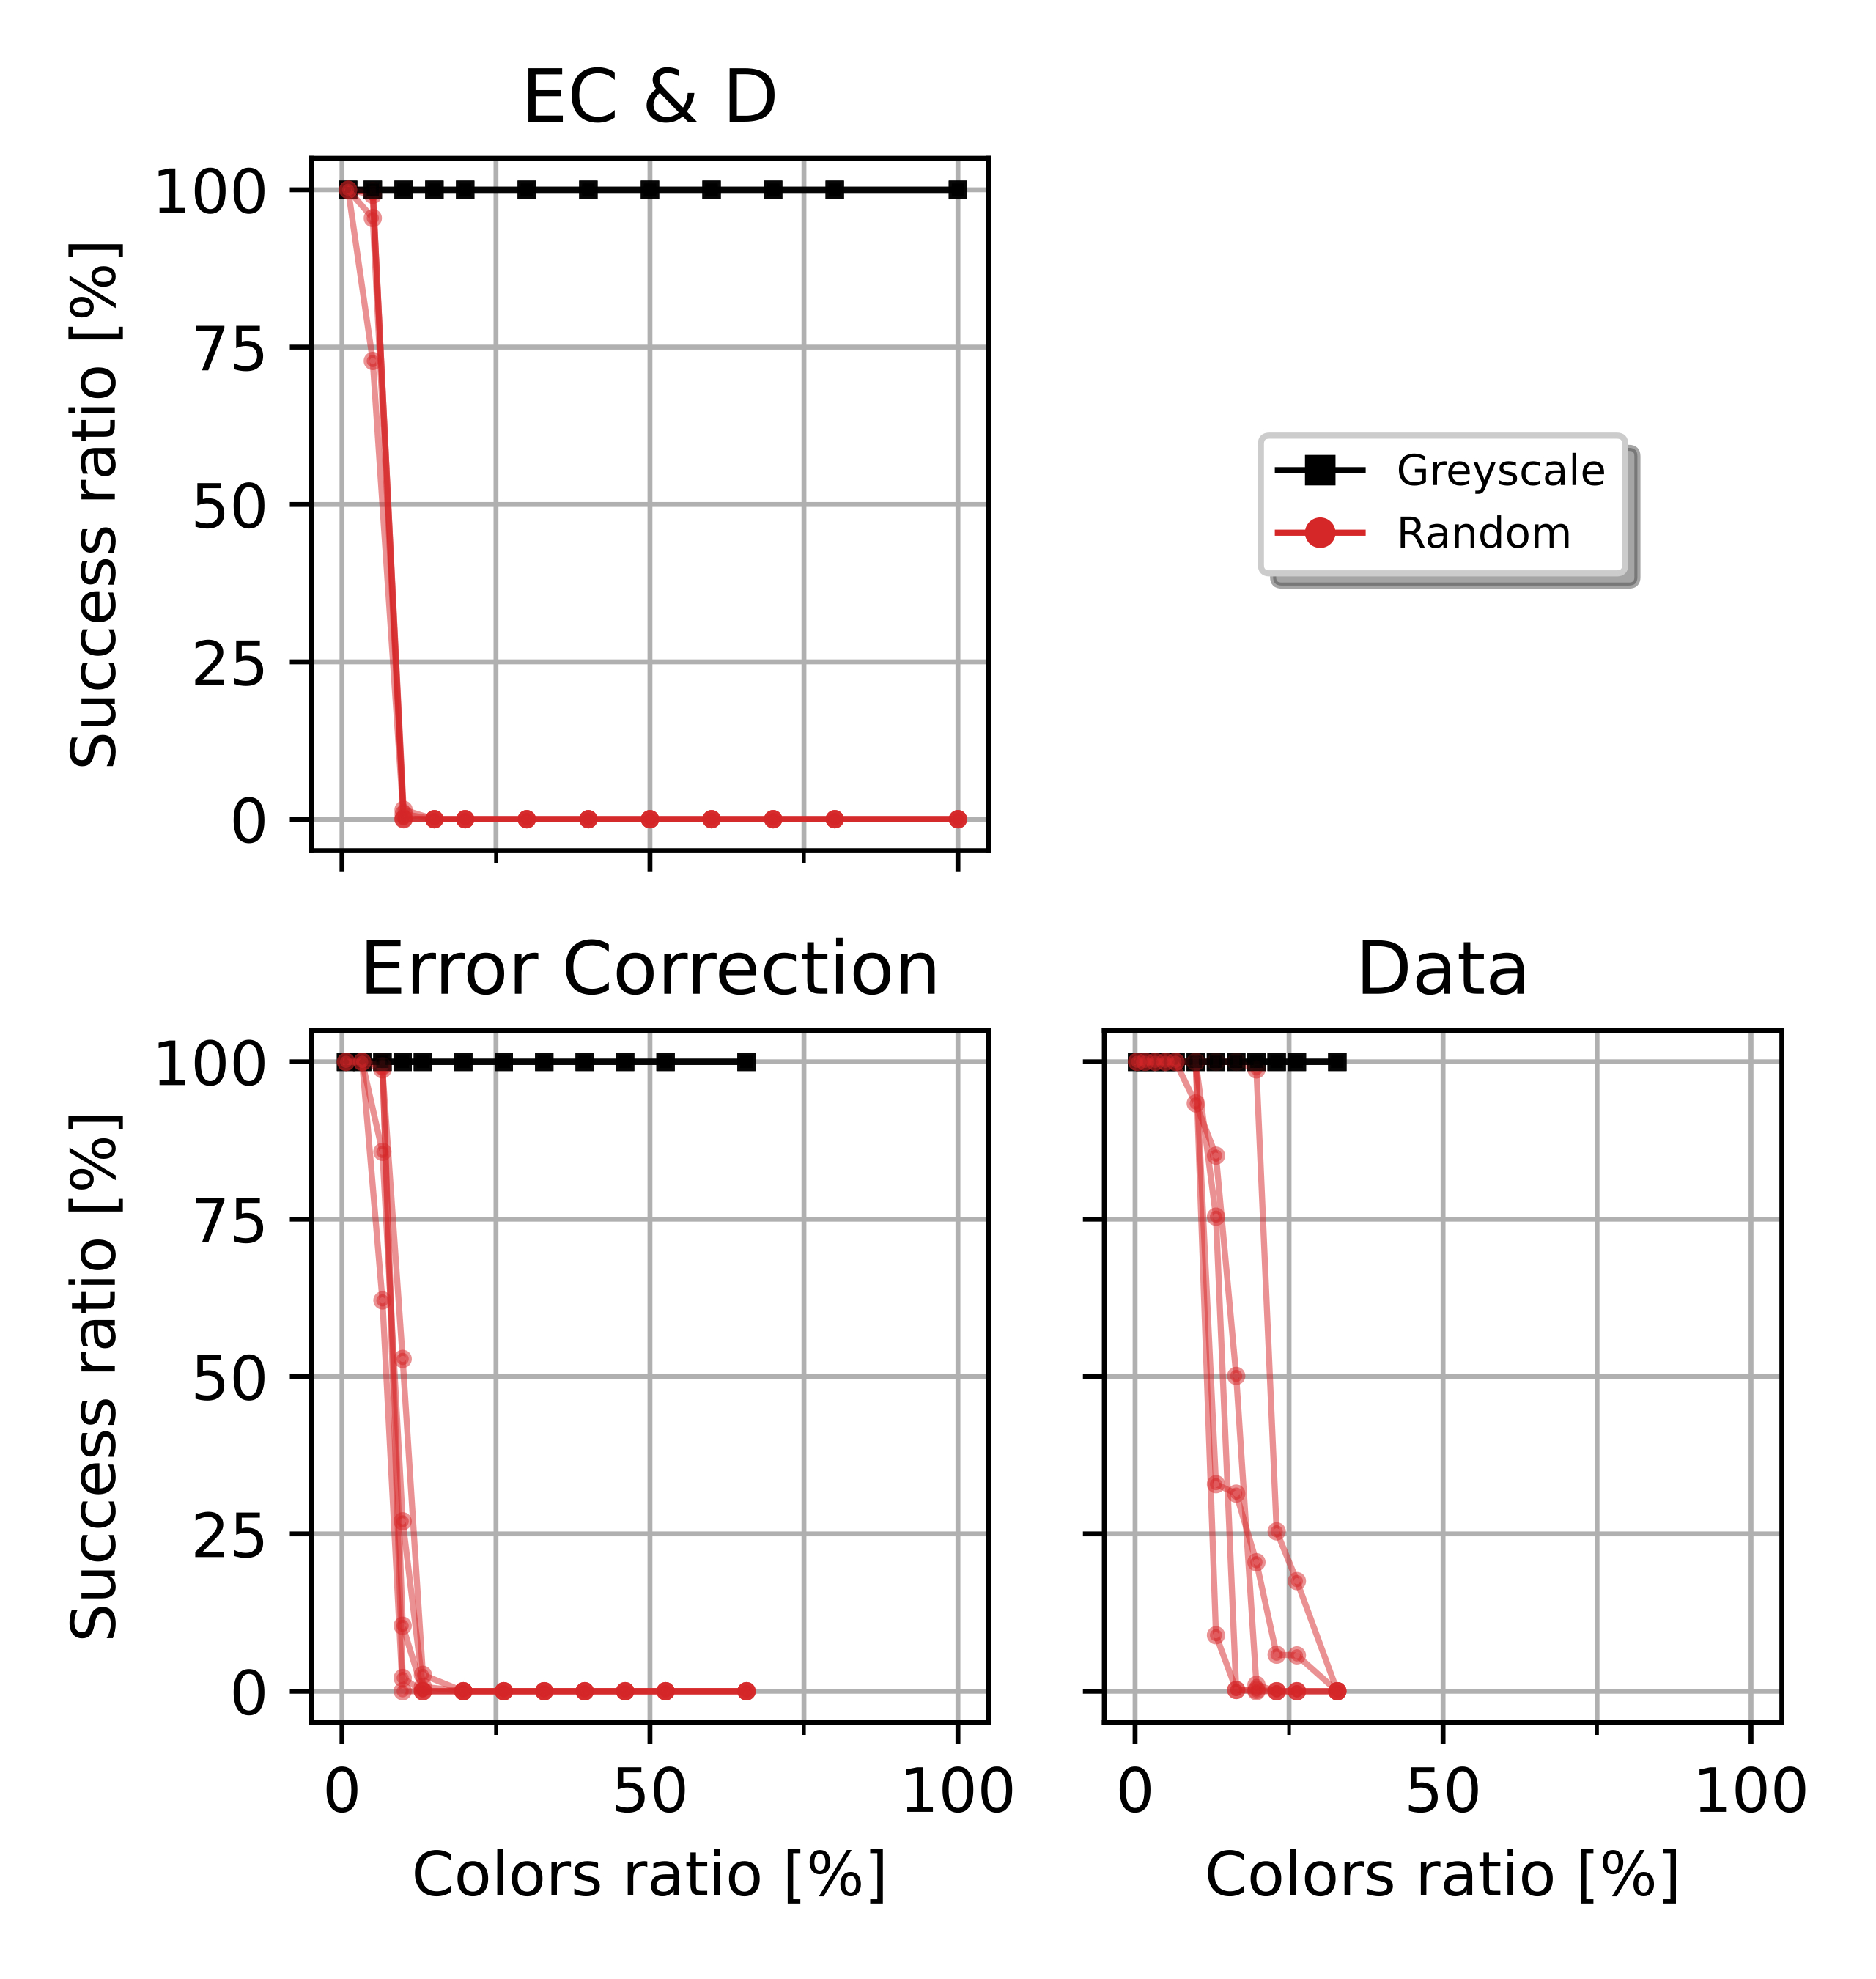 Success ratio of decoded QR Codes before passing through a channel among different embedding zones (EC&D, Error Correction and Data), for each color mapping method (greyscale and random) for all QR Code versions. Each curve represents a QR Code version, there are up to 5 curves for each method, Greyscale (squares, black) and Random (dots, red).